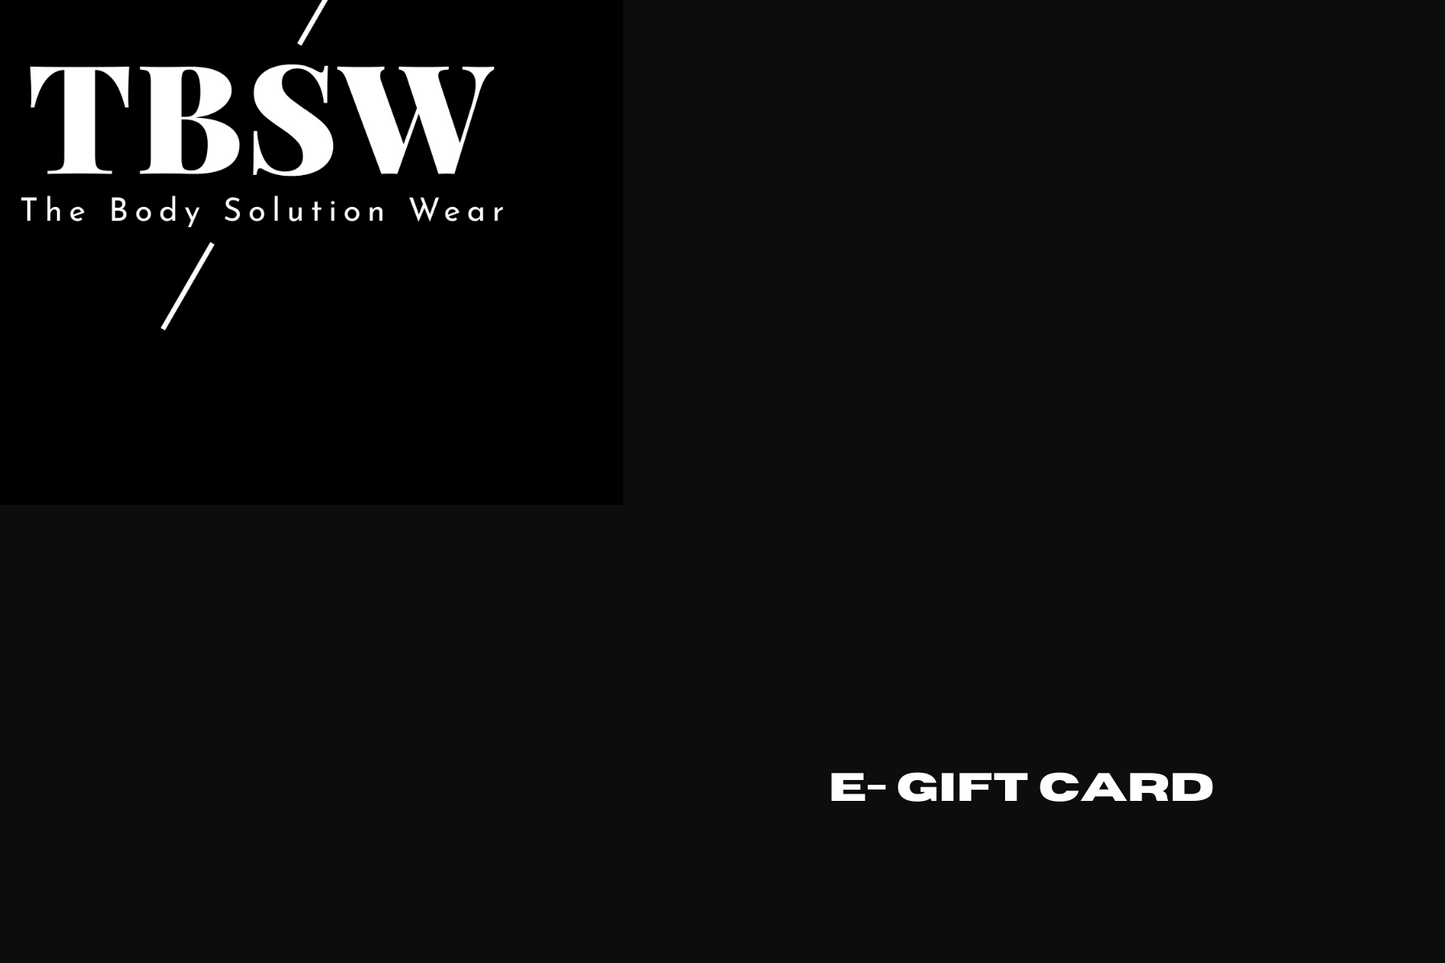 £500 GIFT CARD - TBSW